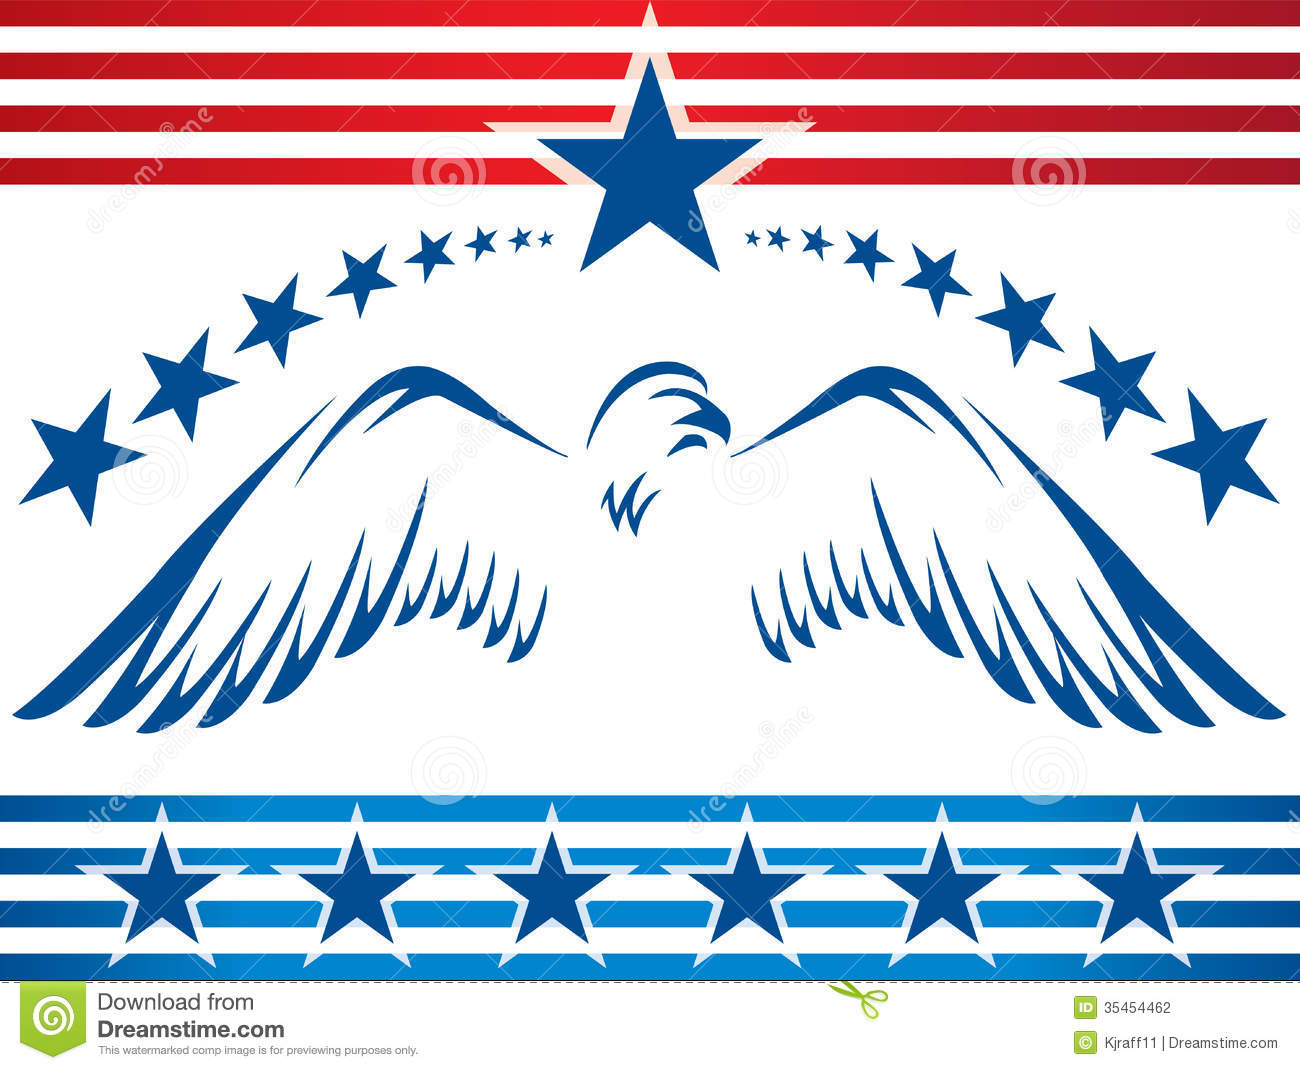 Eagle Illustration With Stars And Stripes Graphic Mr No Pr No 2 435 1